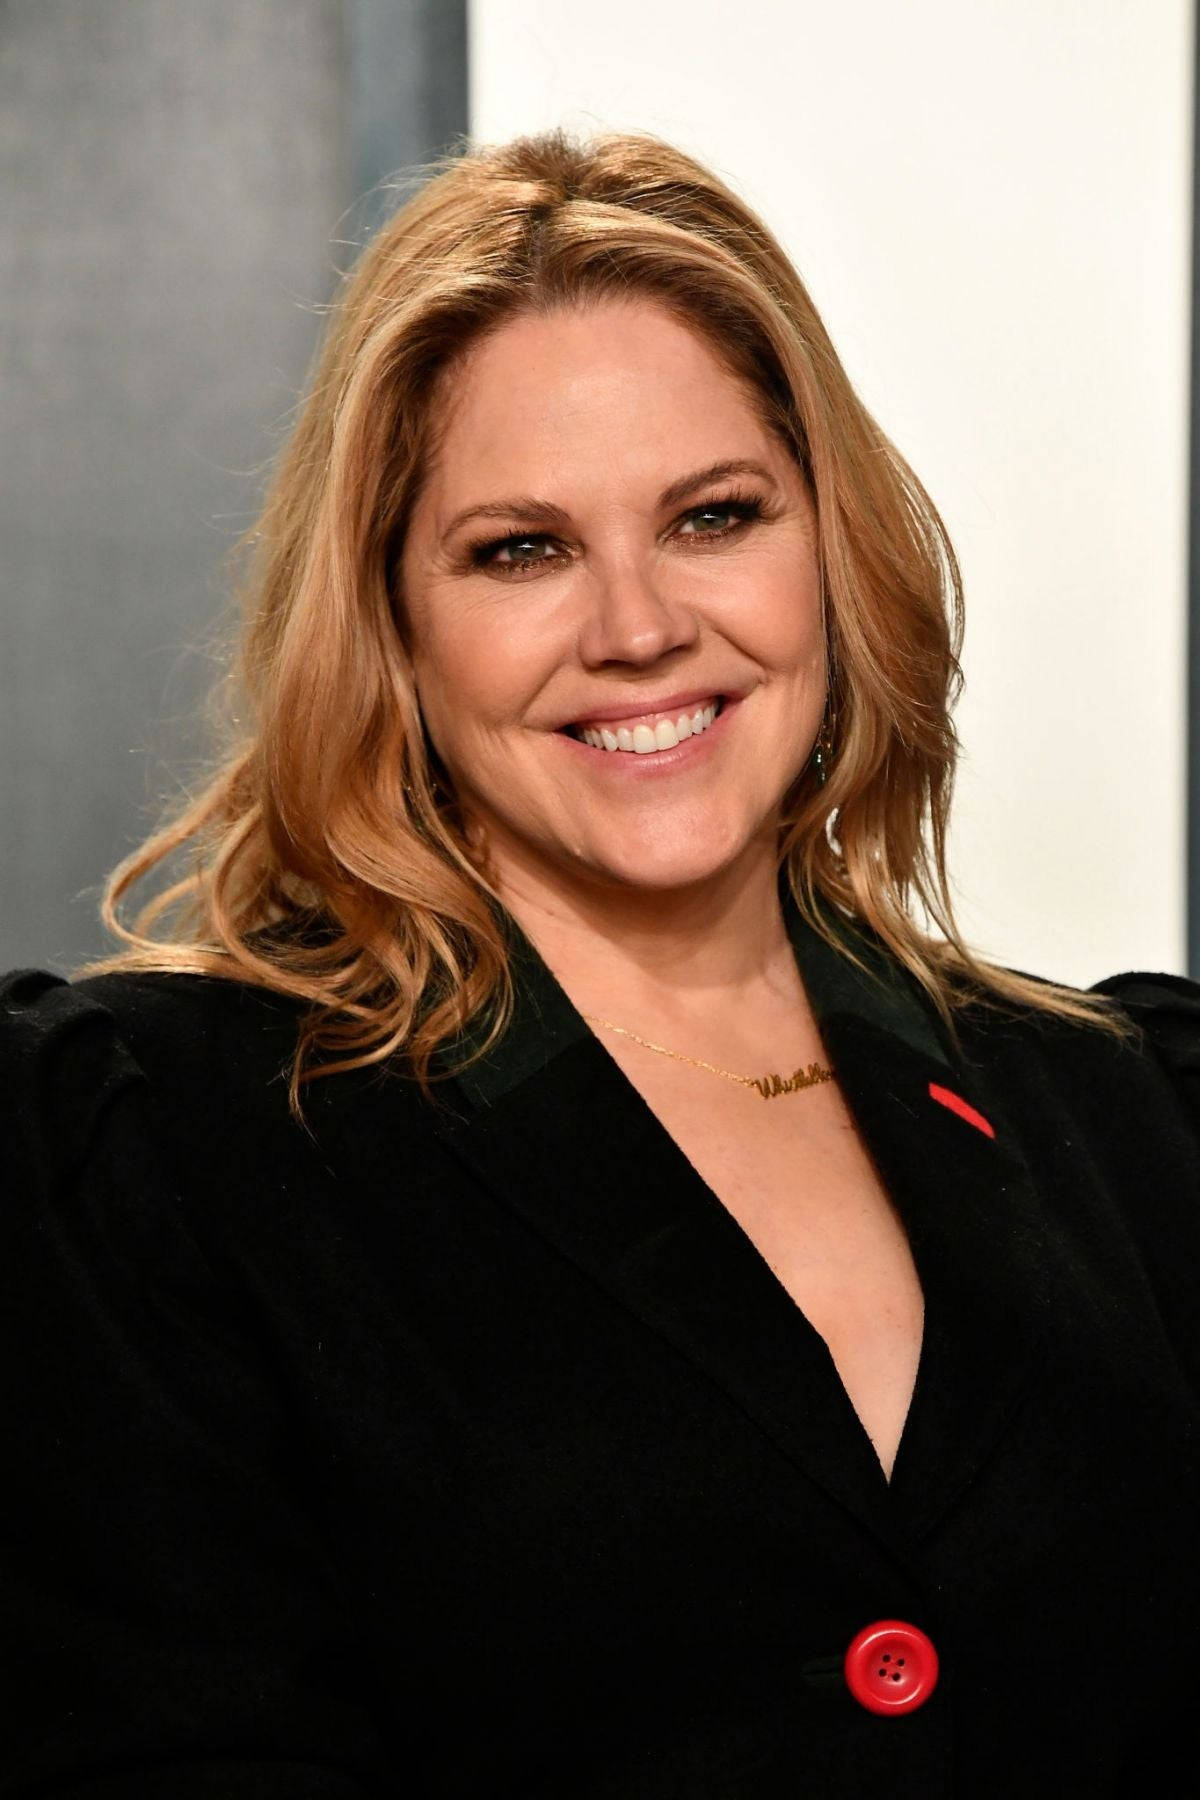 Mary McCormack At A Vanity Fair Event Wallpaper